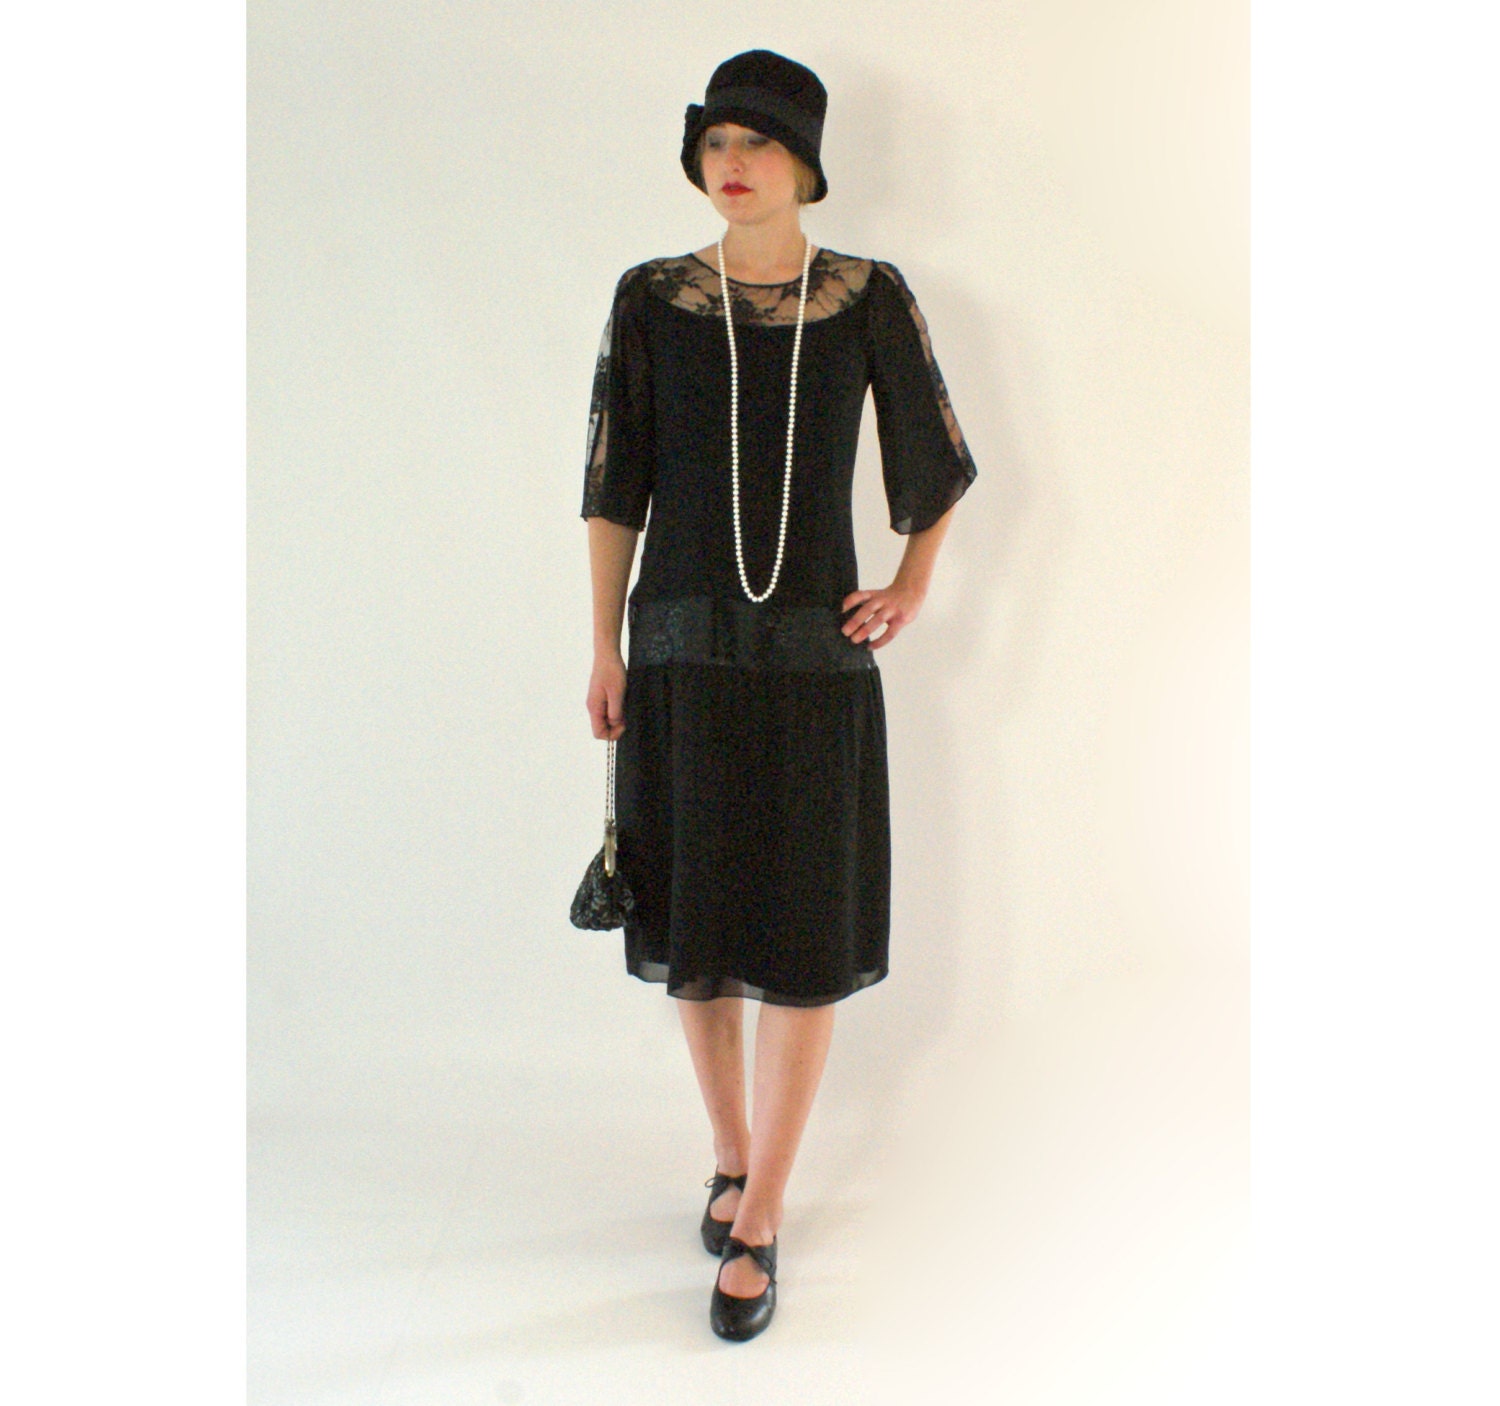 Black 1920s chiffon and lace dress elbow-length sleeves